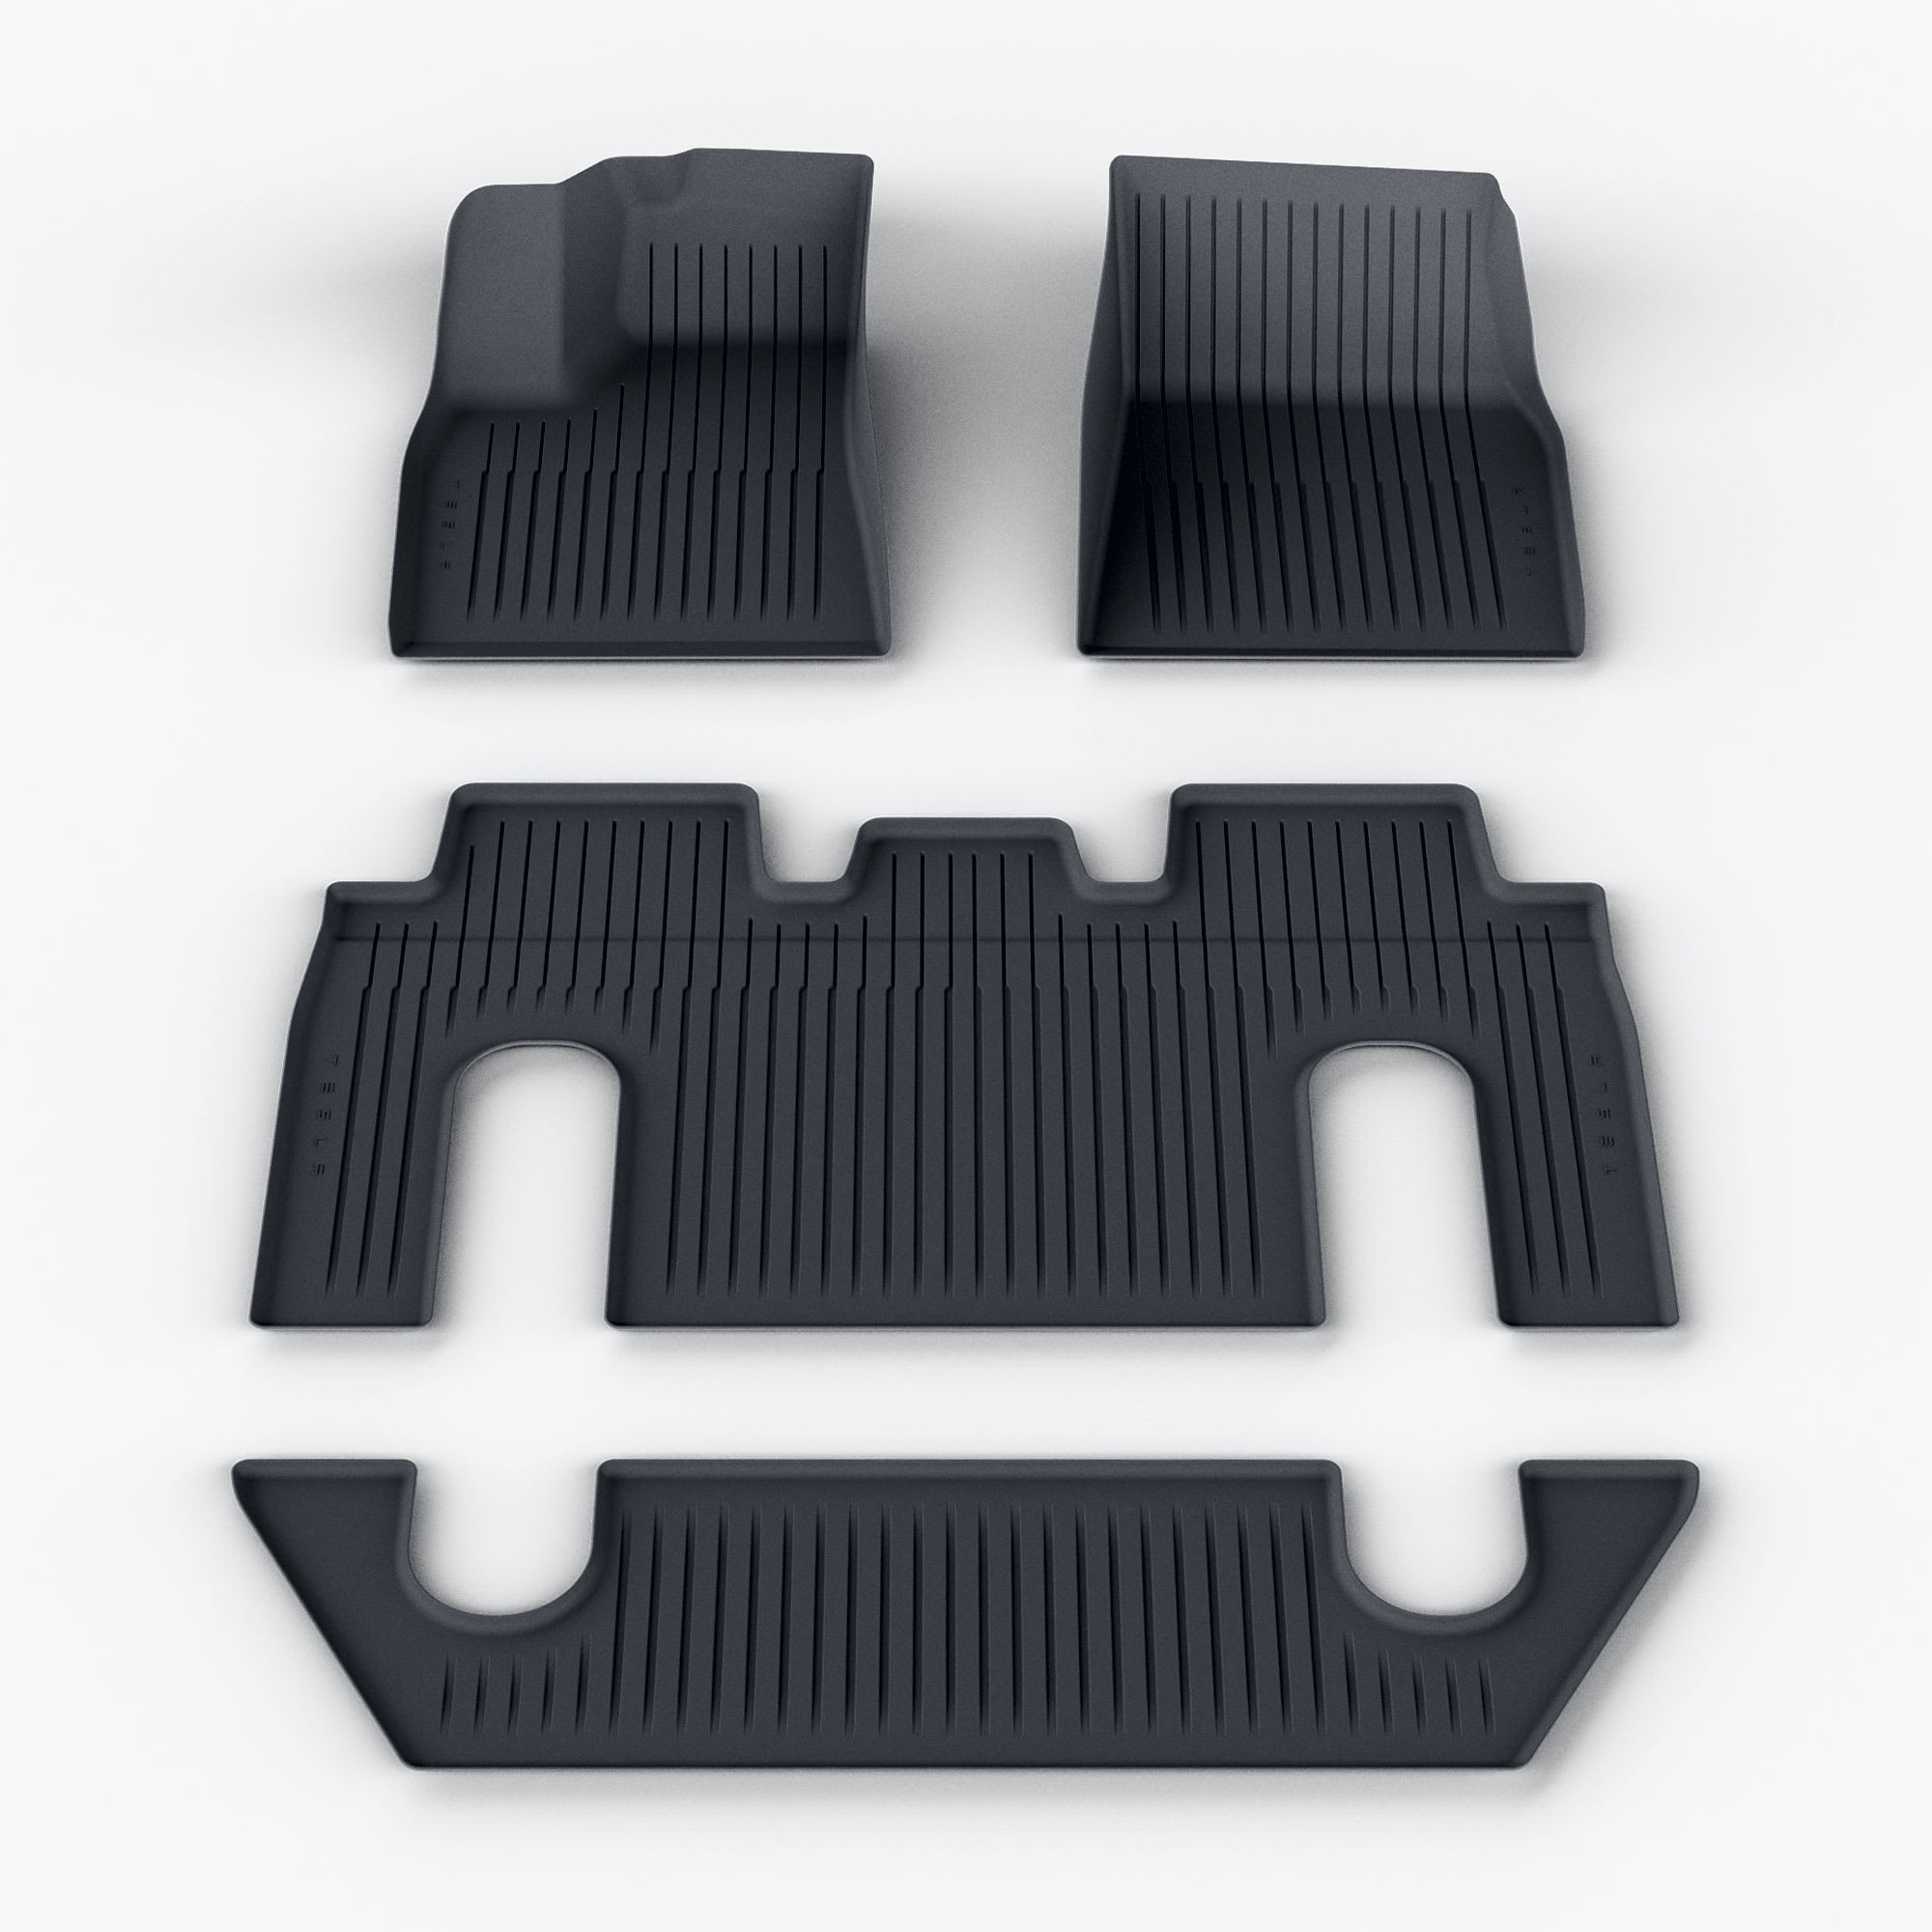 Model X All-Weather Interior Liners